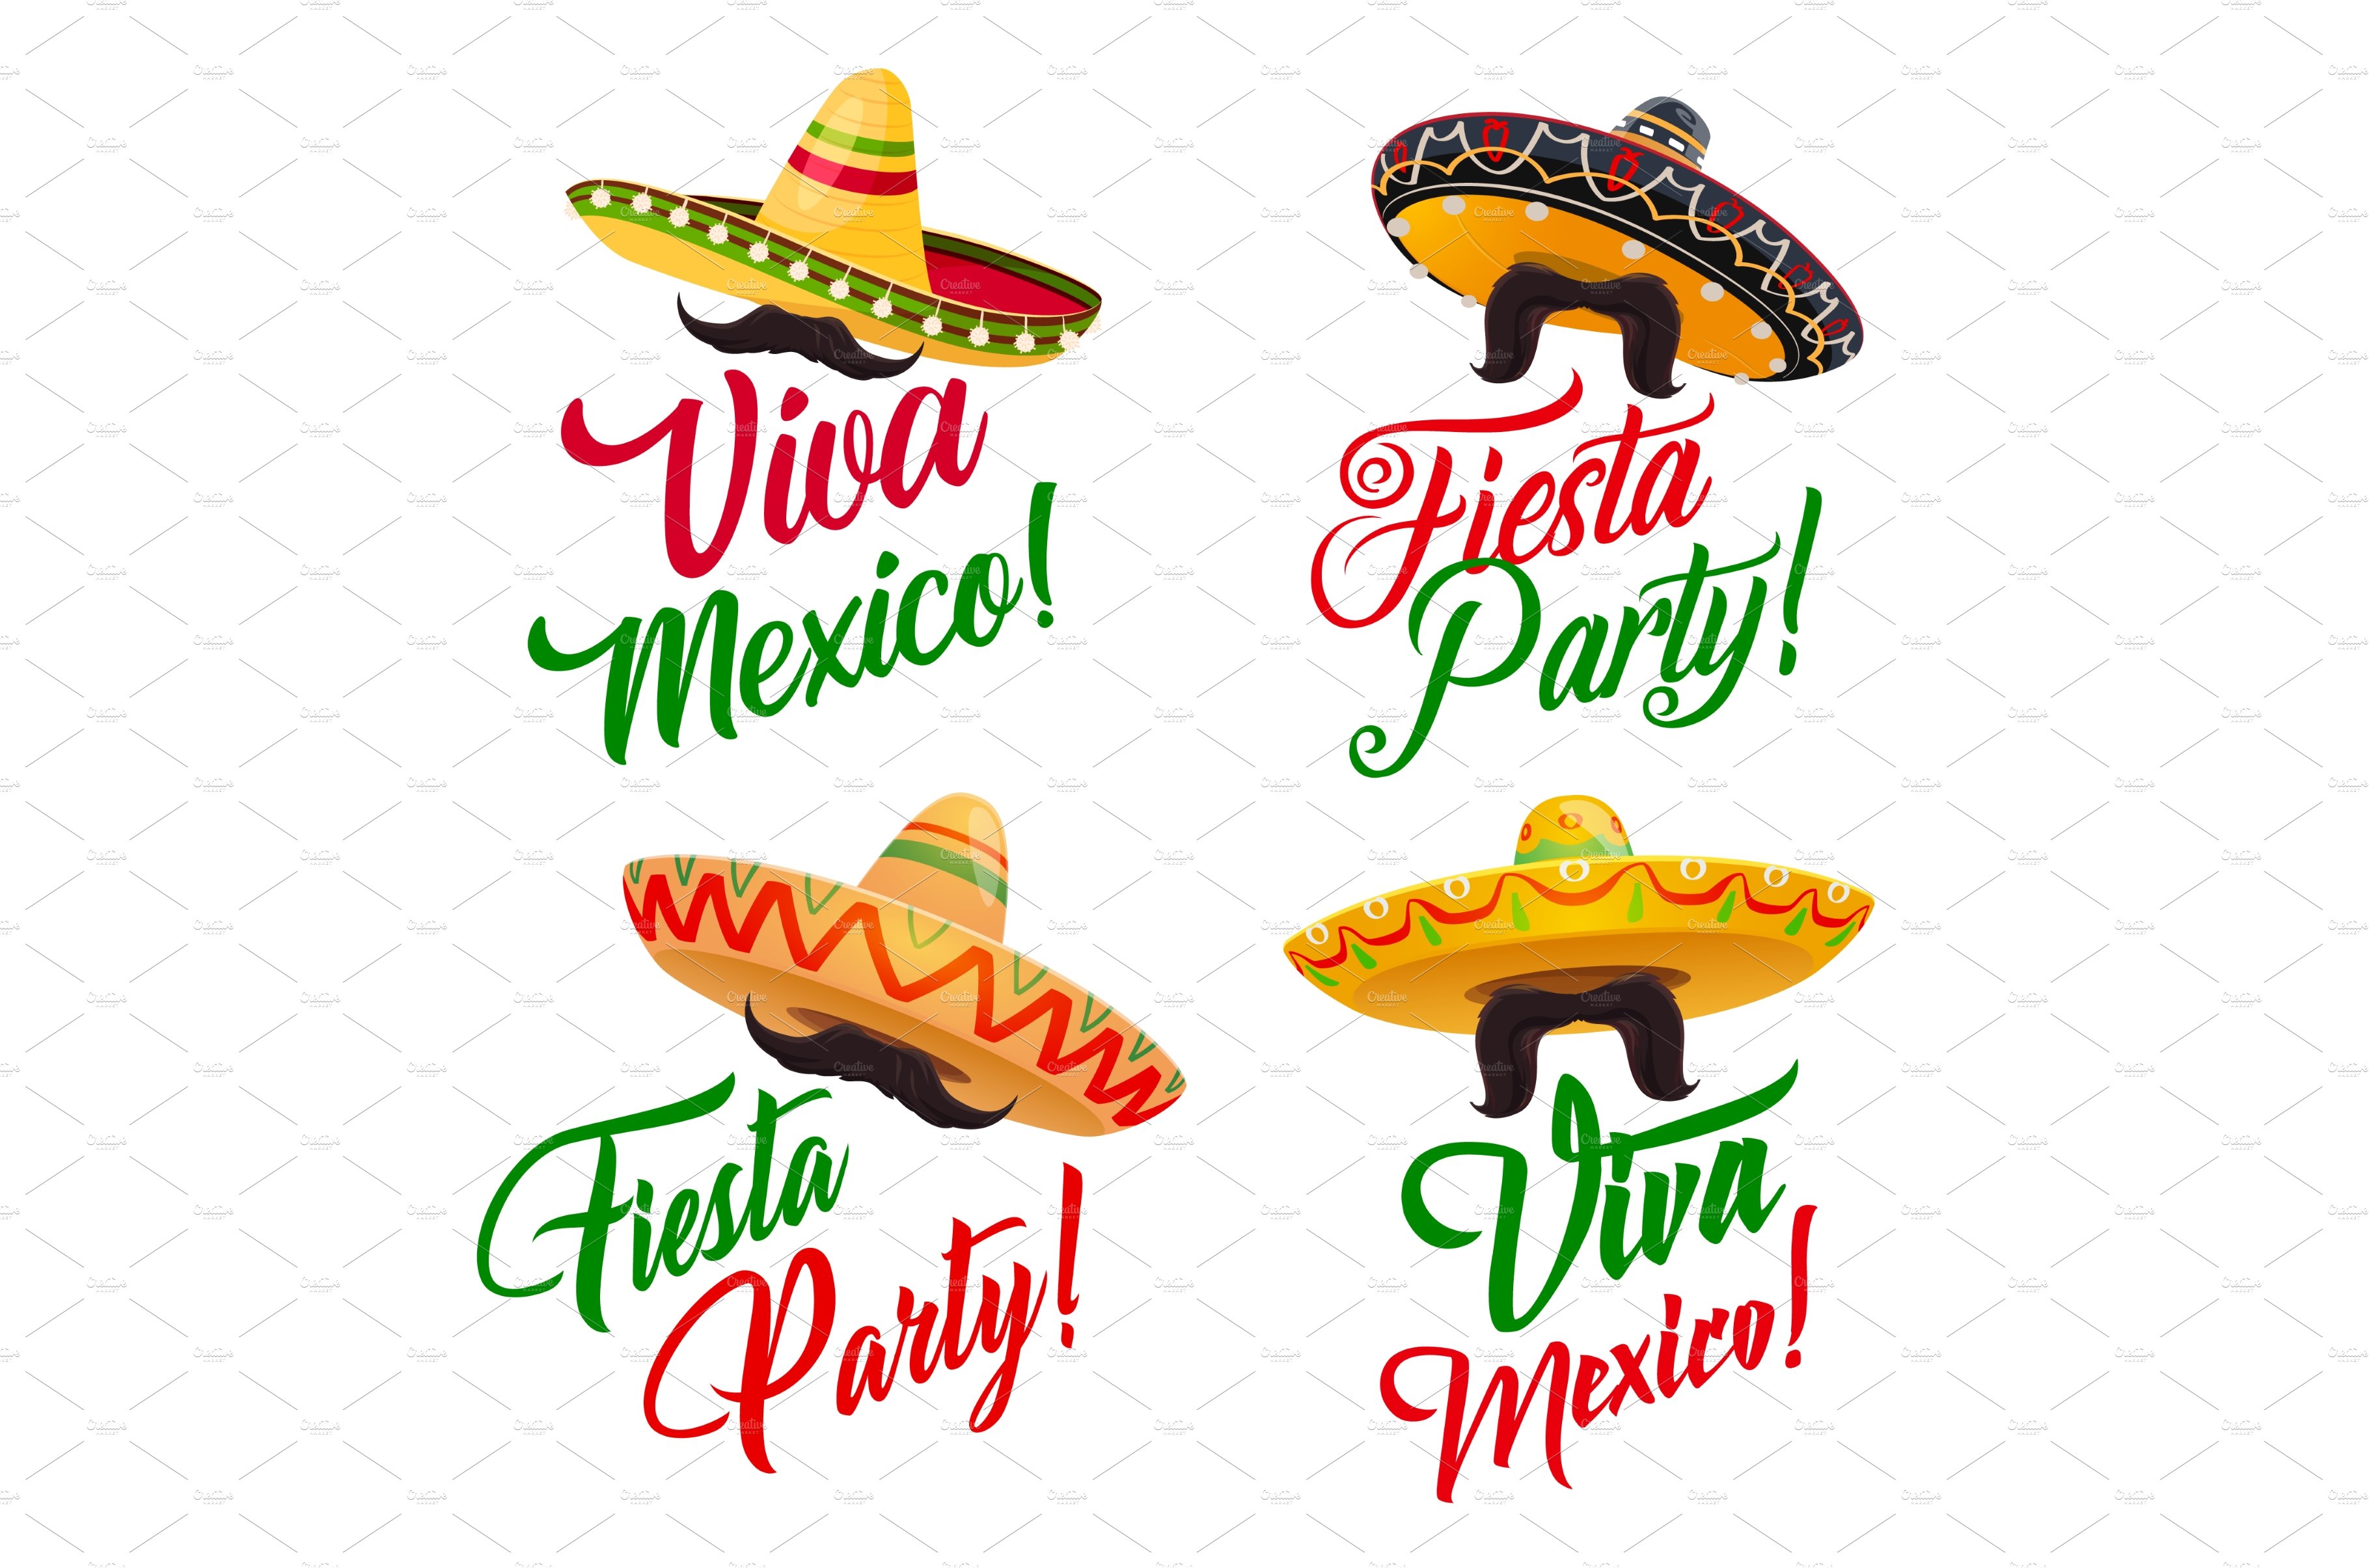 Viva Mexico and Mexican fiesta party cover image.